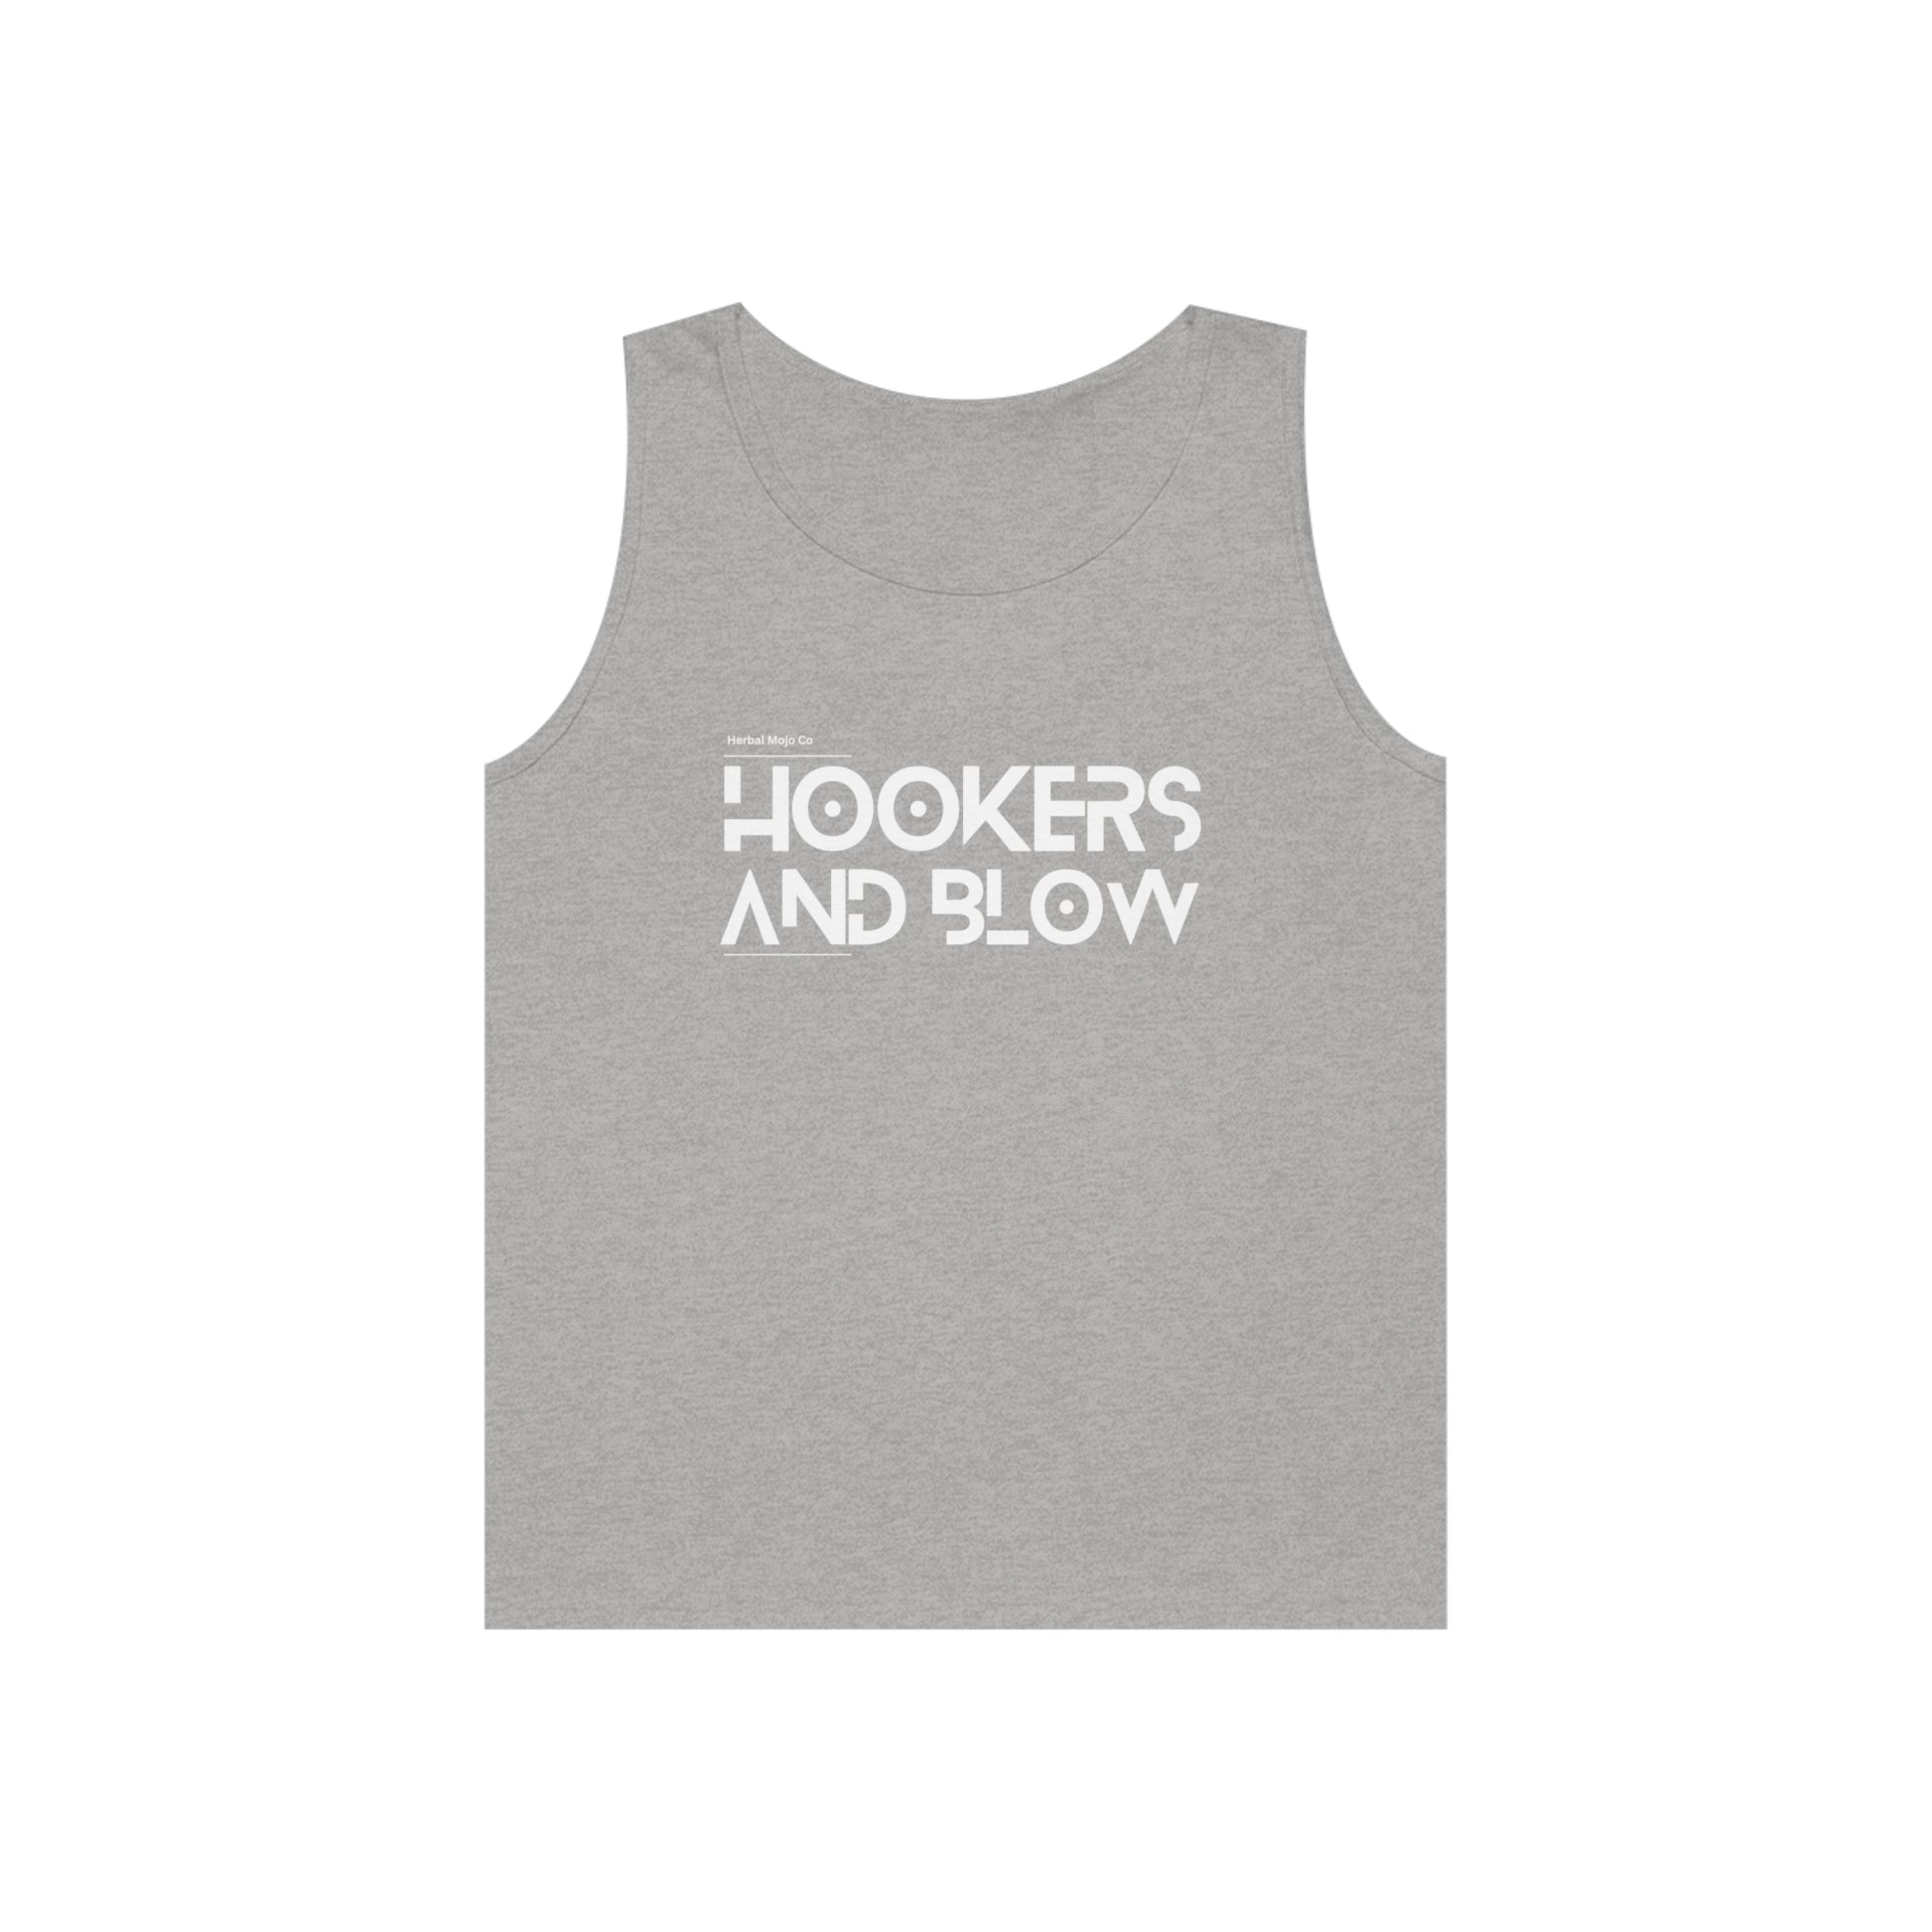 The Stamina for Men Hookers & Blow unisex Grey cotton tank top product shot with white background